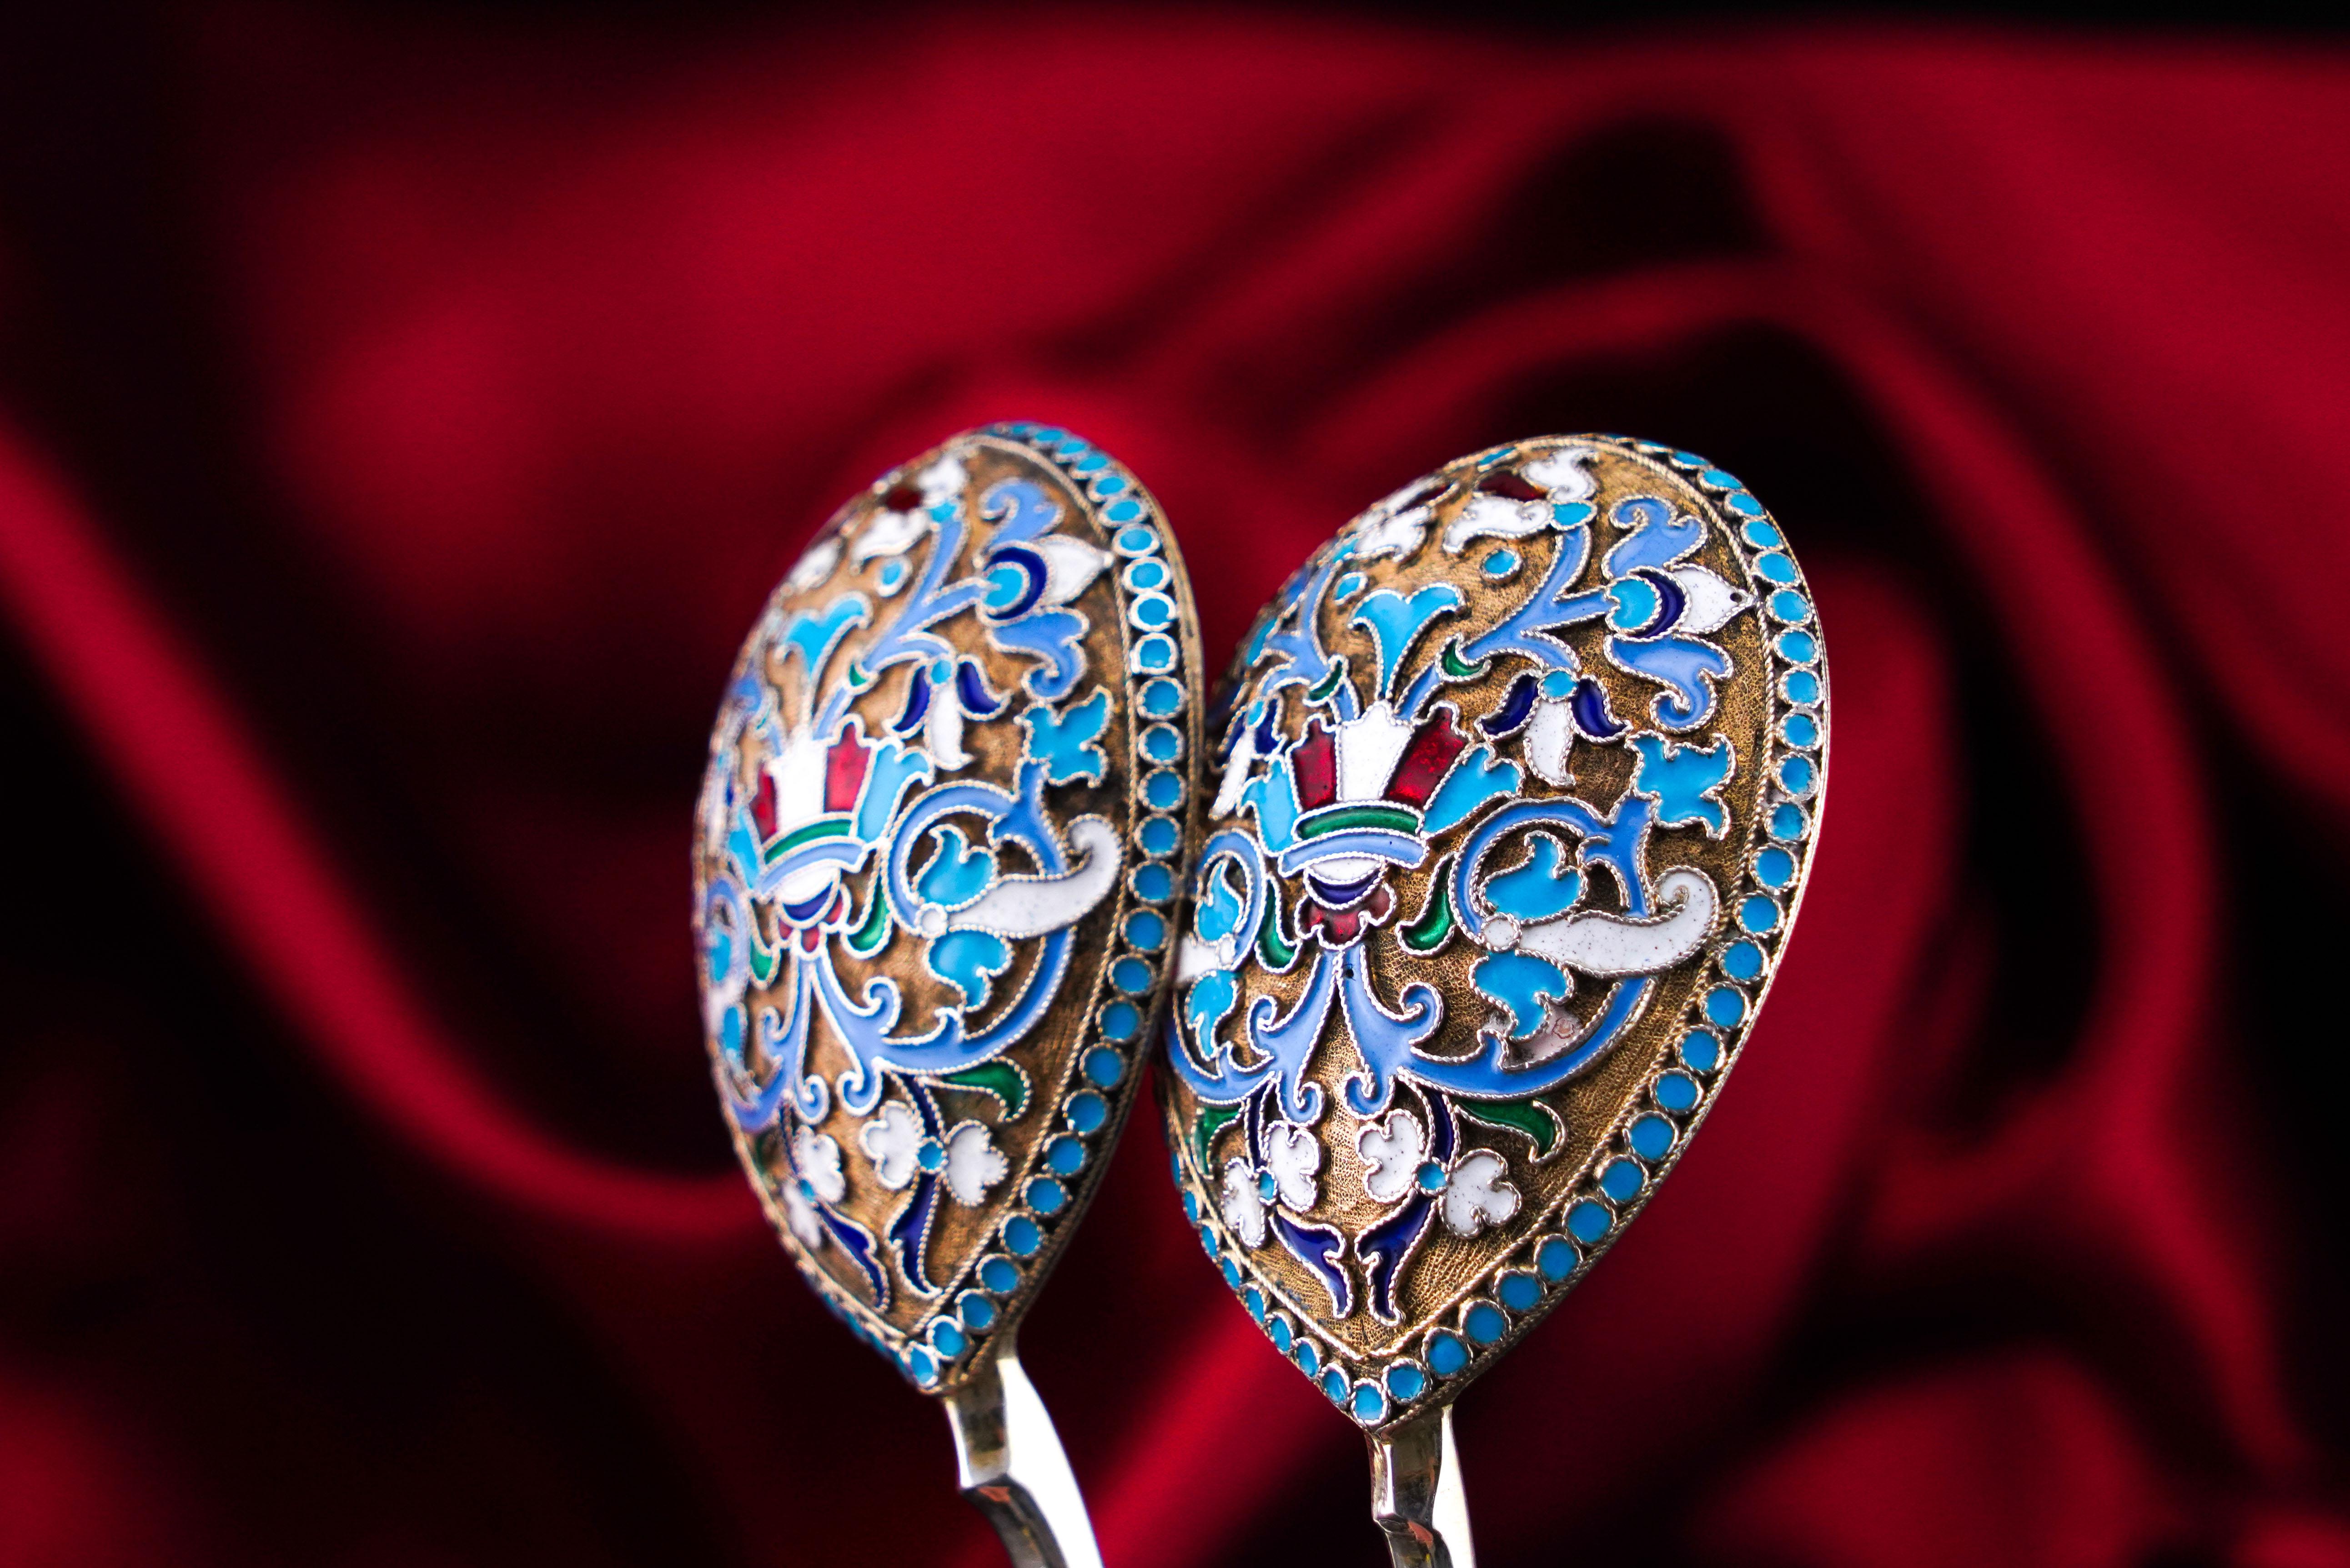 We are delighted to offer this beautiful pair of antique Imperial Russian solid silver enamel spoons made in Moscow c.1882-1899 with marks for Vasily Agafonov.

This pair is of a larger size than a normal pair of enamelled Russian spoons (larger